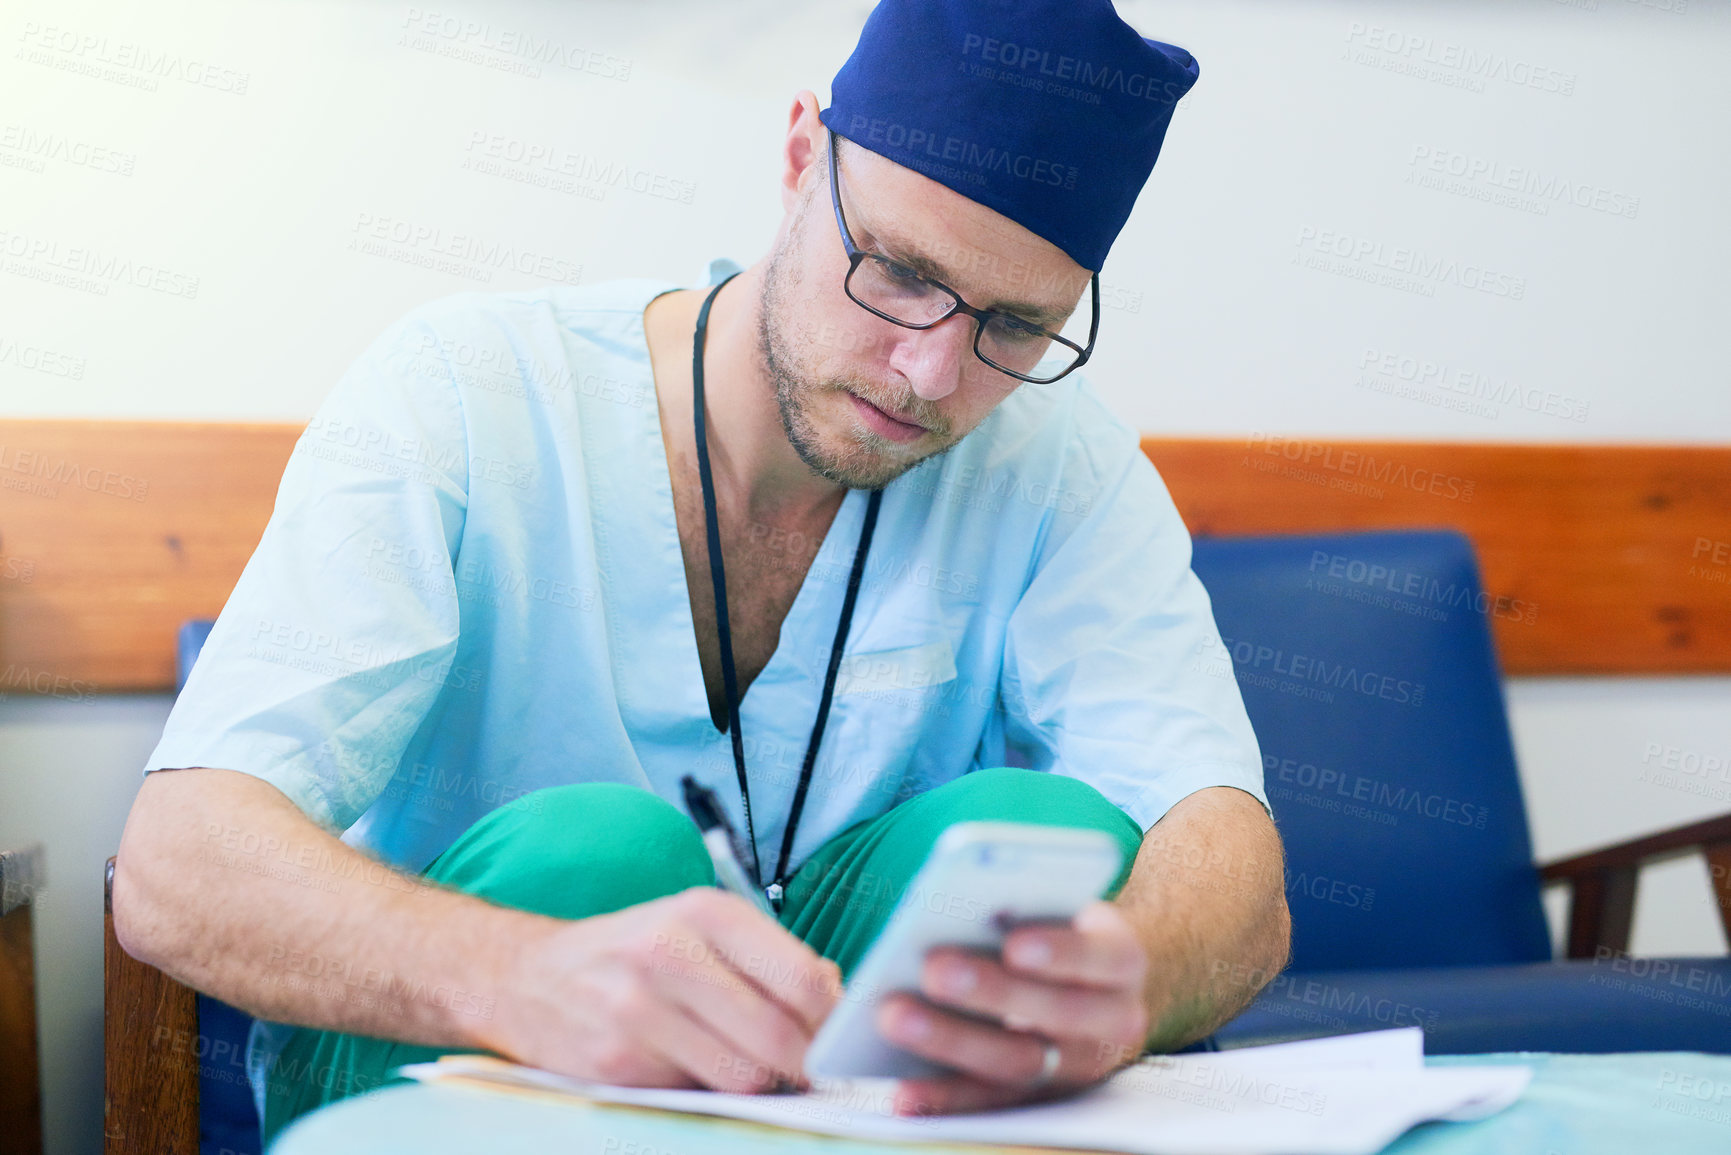 Buy stock photo Shot of a young surgeon filling out paperwork in a hospital